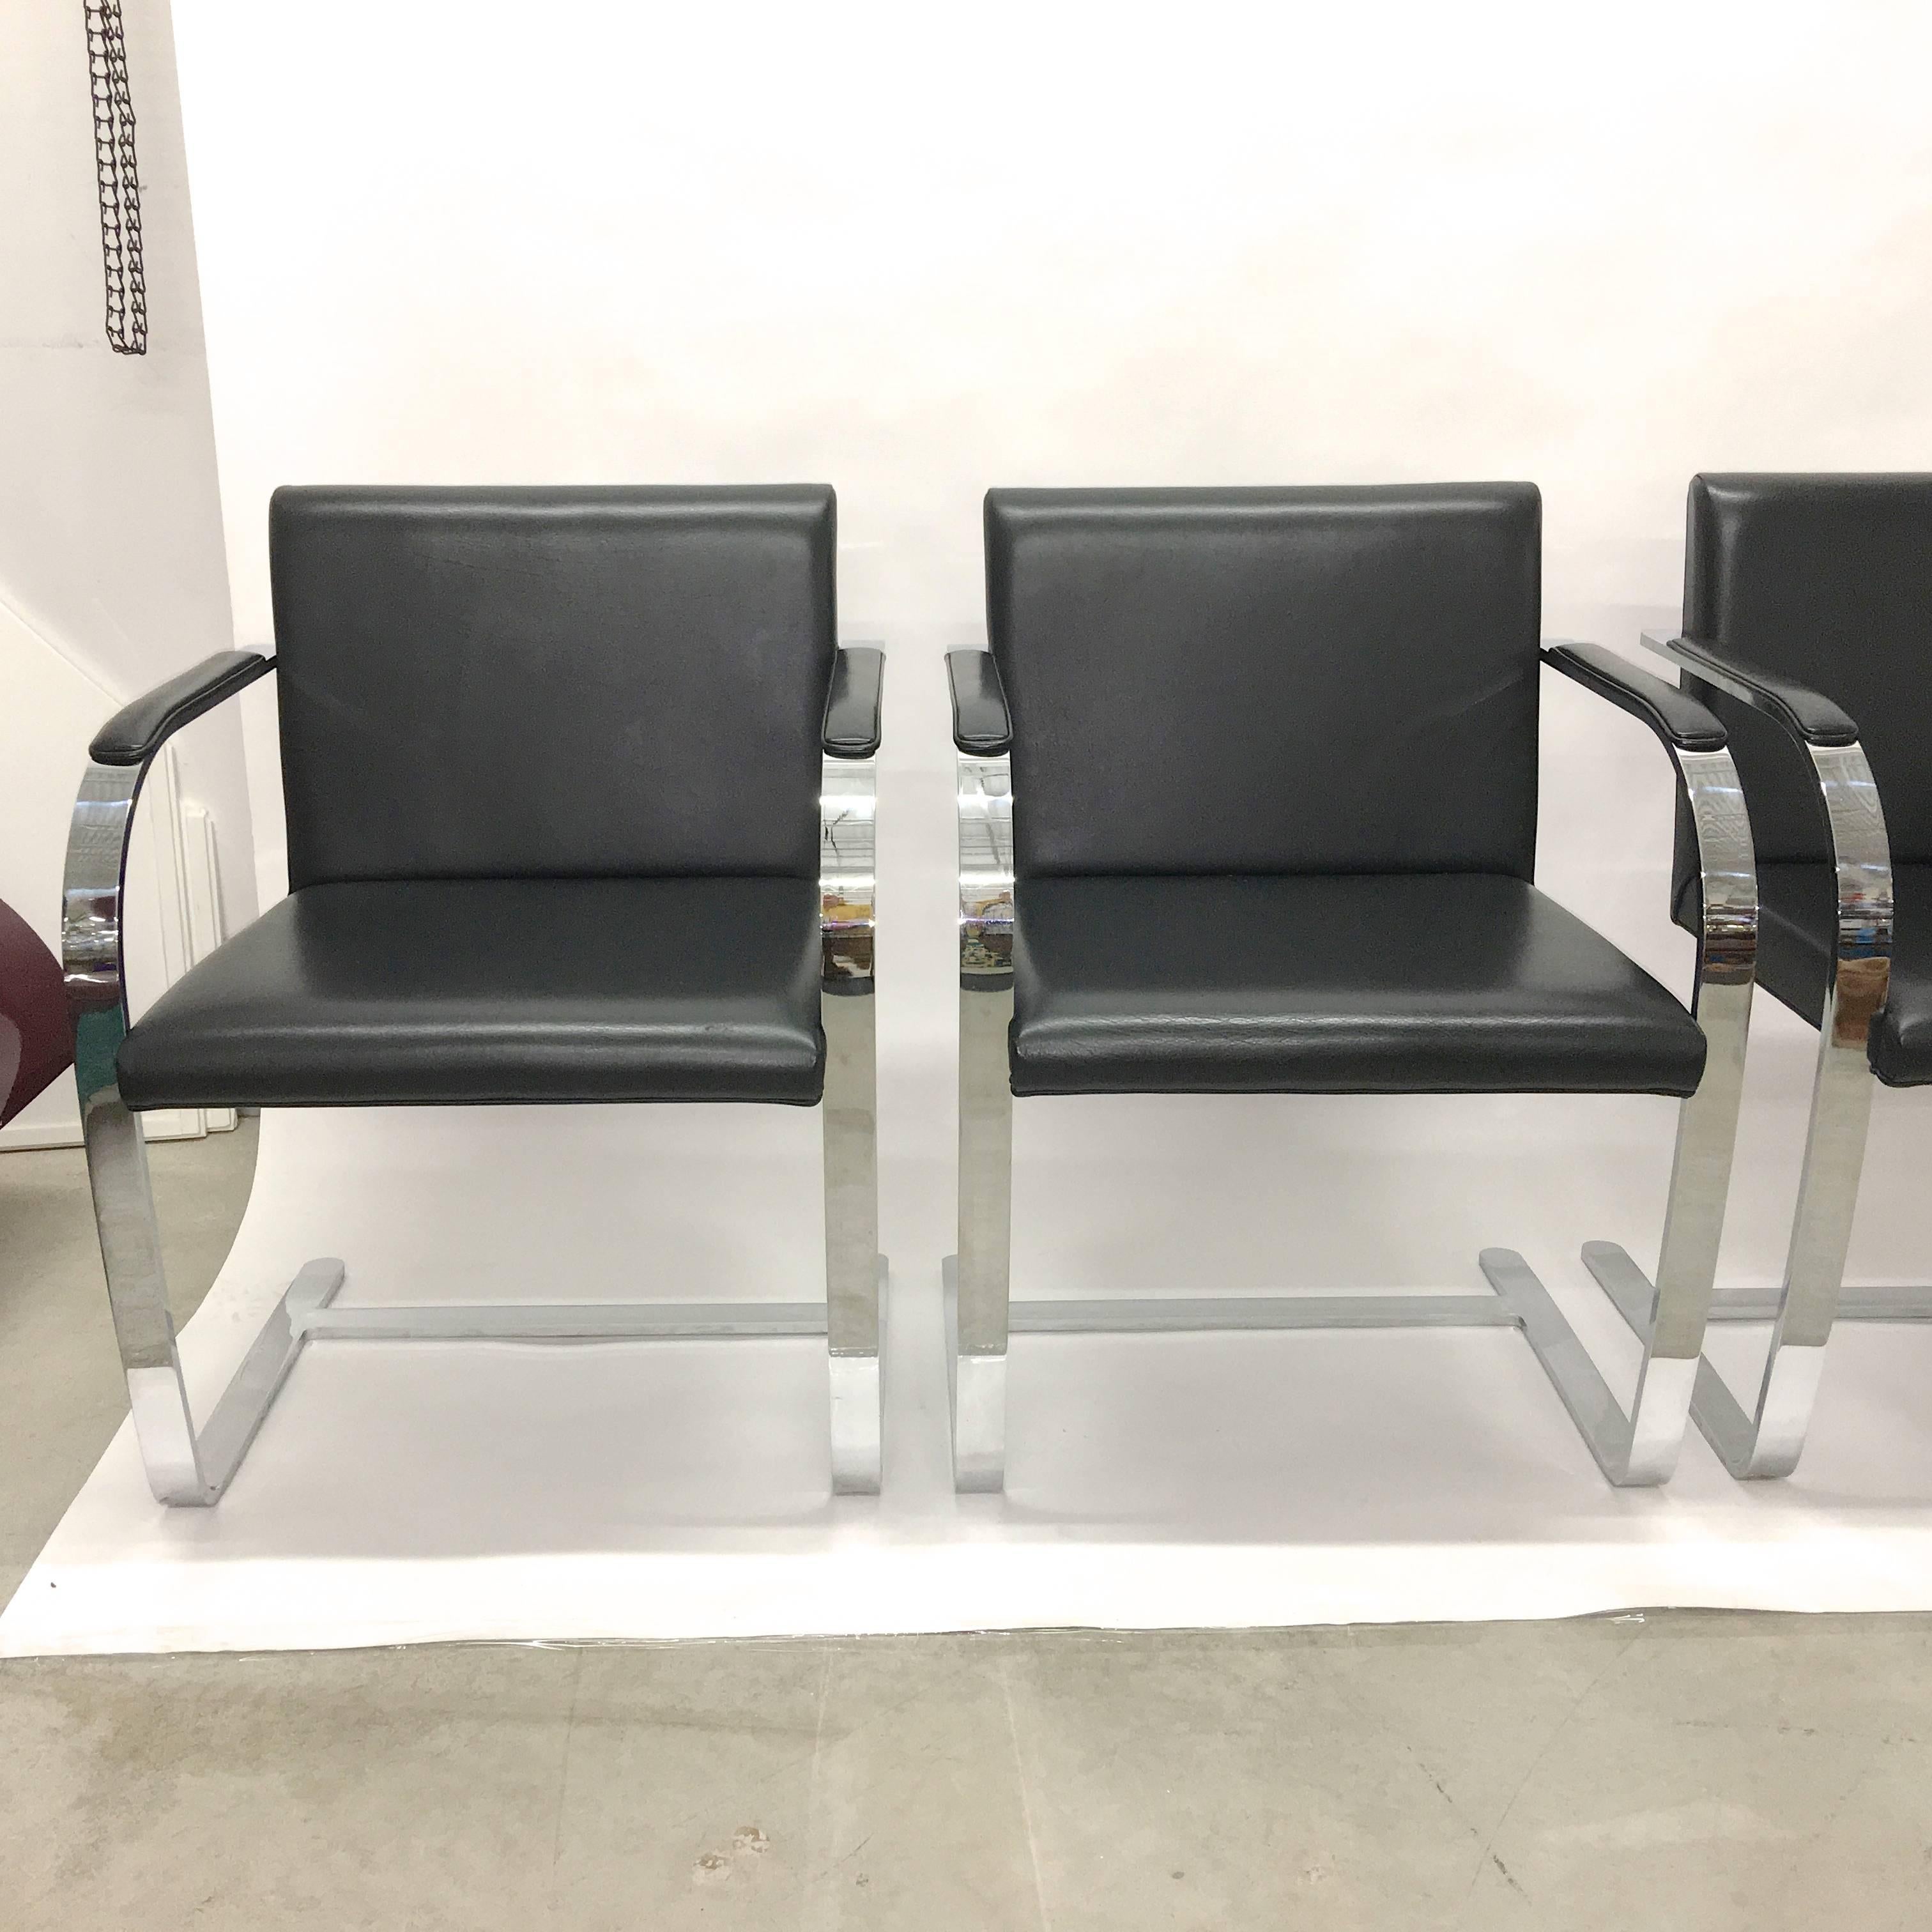 Set of four Brno chairs with flat bar polished chromed steel cantilevered frame and black leather upholstered seats and arm pads.

These were produced by Knoll in 2005 and appear to have been barely used at all.

Excellent condition.

Arm